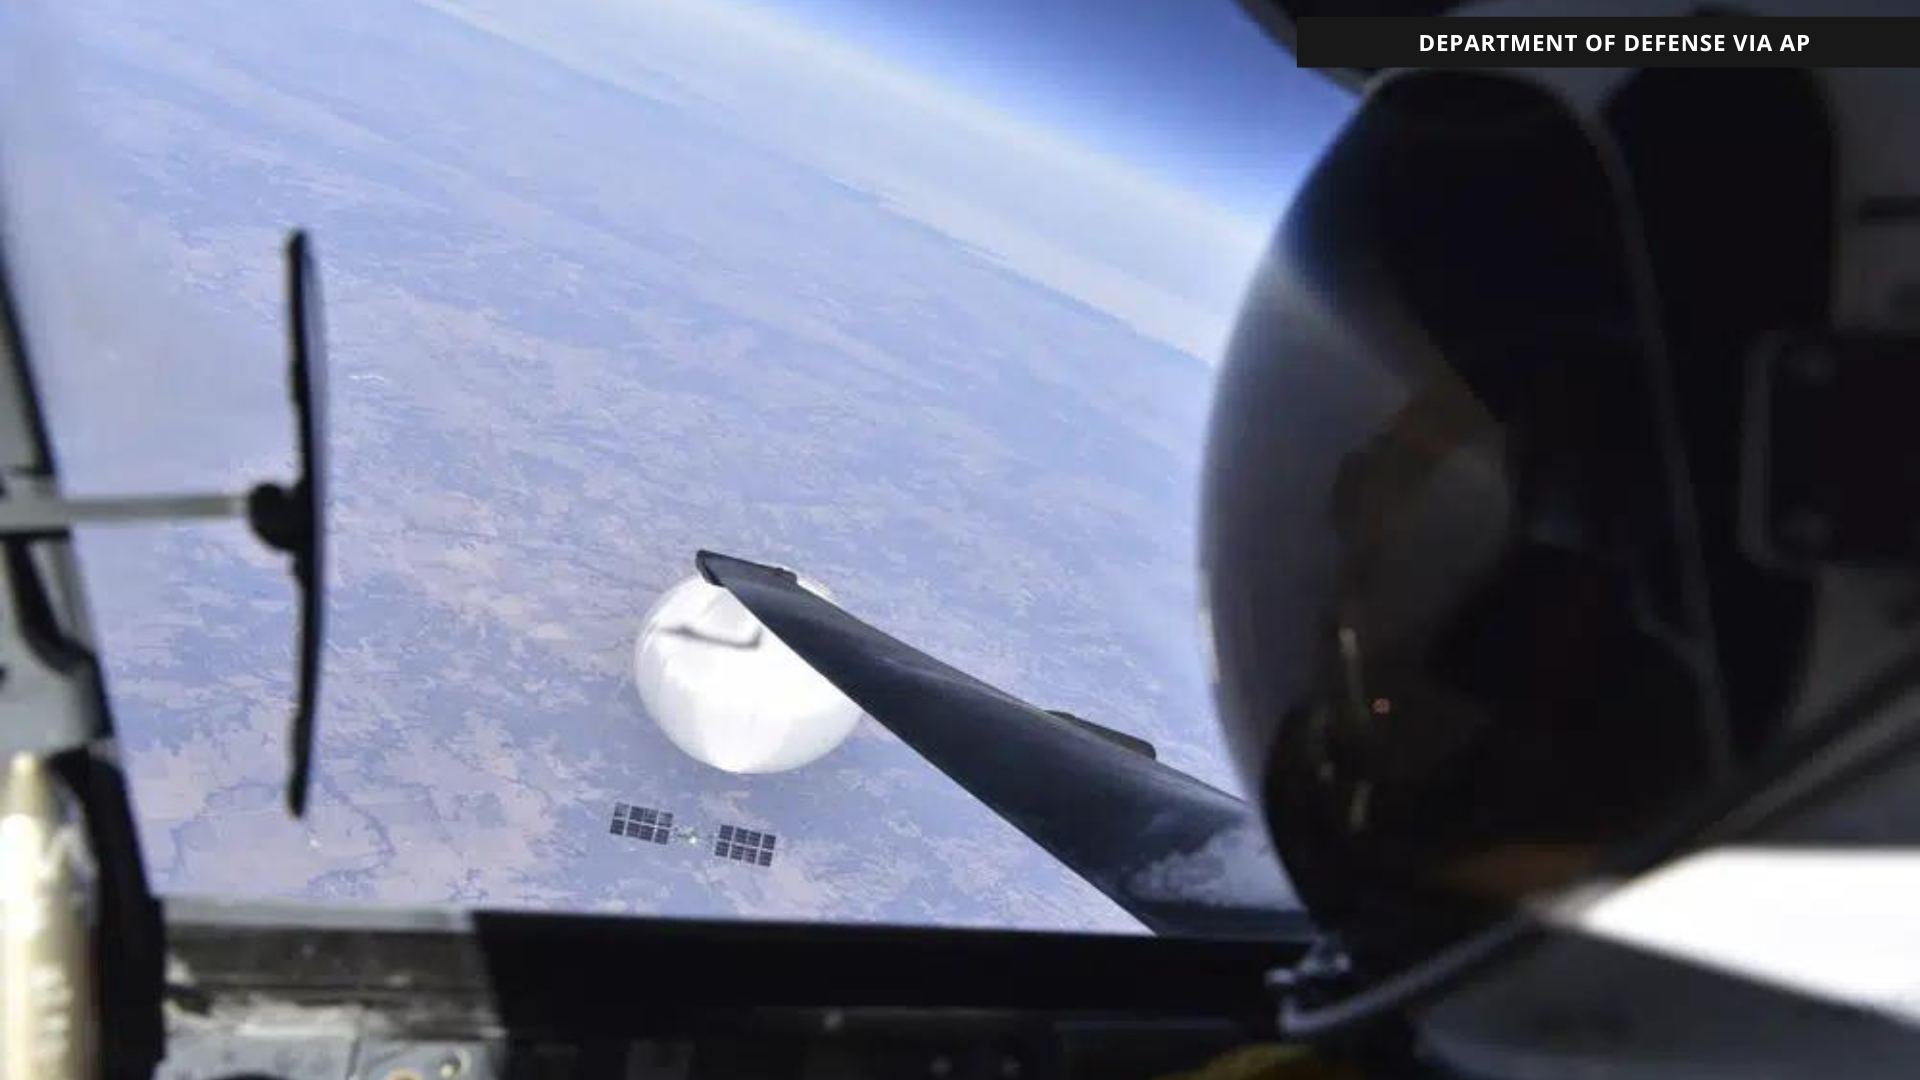 Pentagon Releases Pilot’s Close-Up Photo of Chinese Balloon